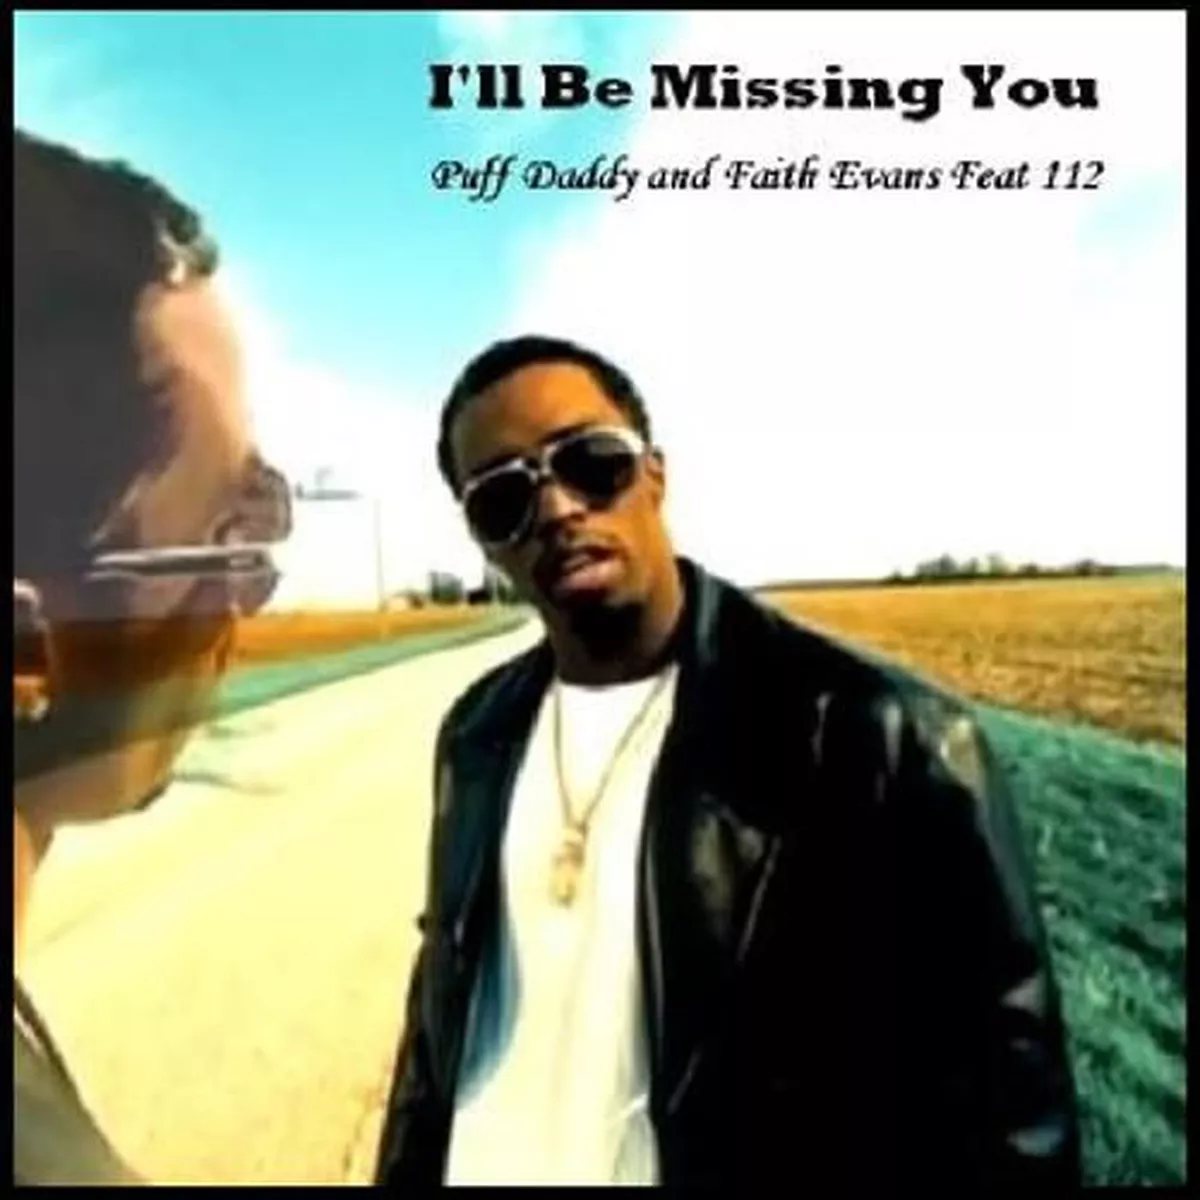 Puff Daddy, Faith Evans, 112 - I'll be missing you